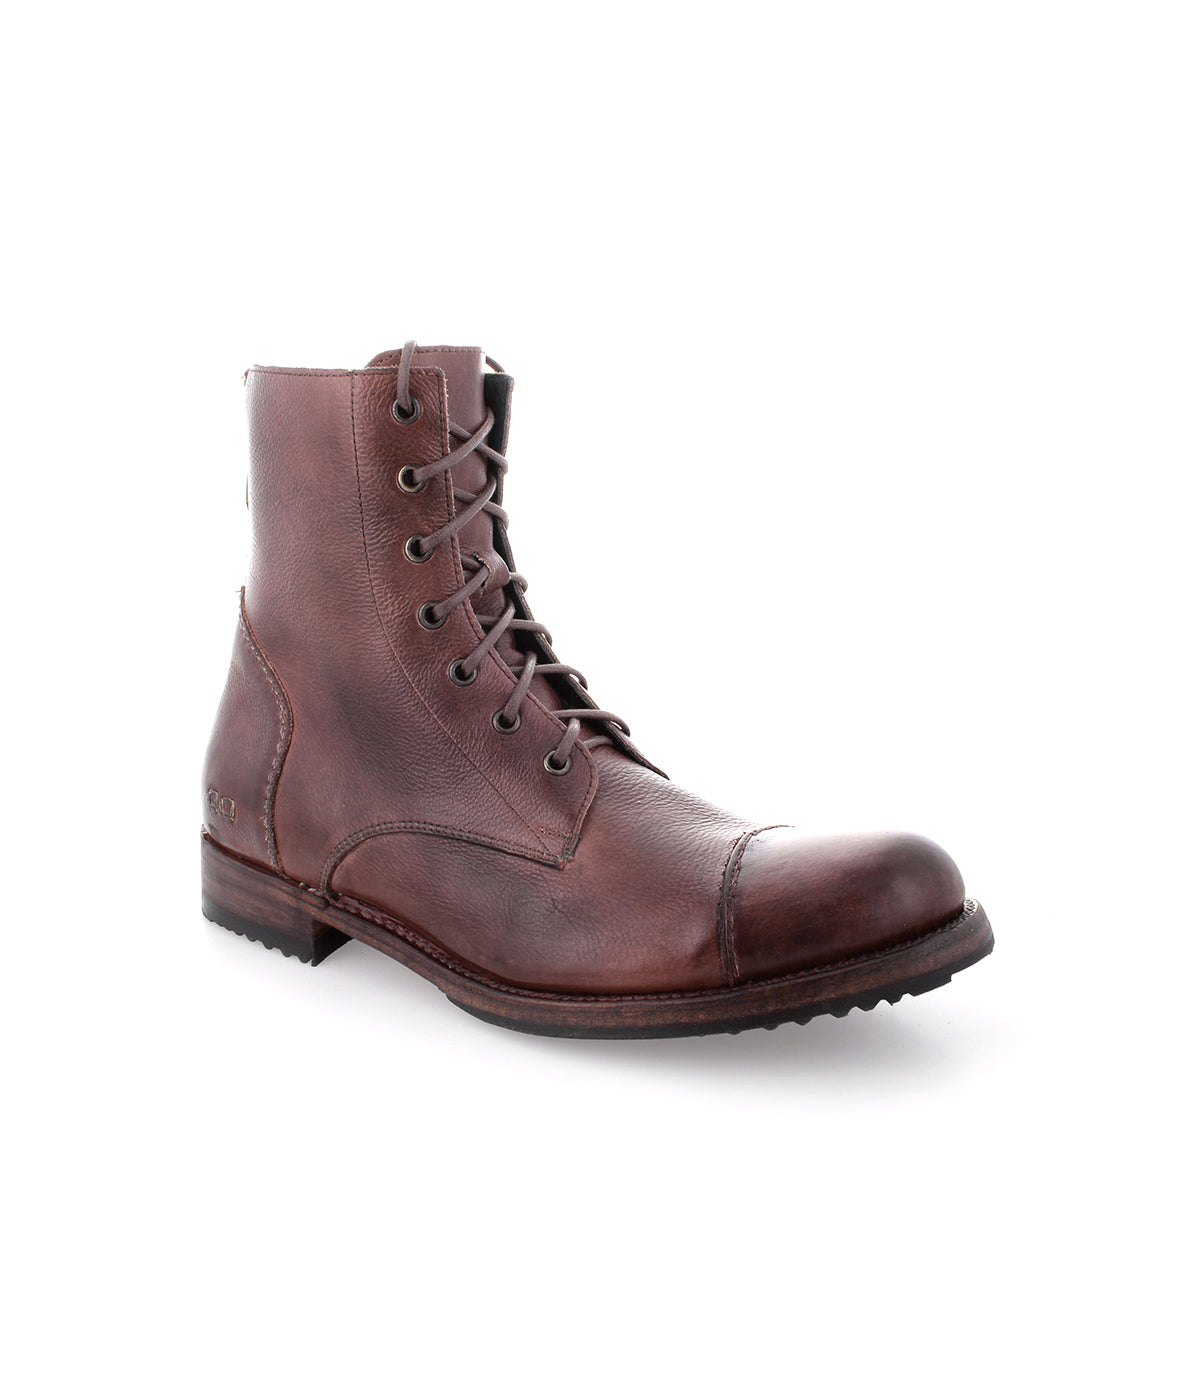 A men's brown leather Protege boot with laces from the Bed Stu brand.